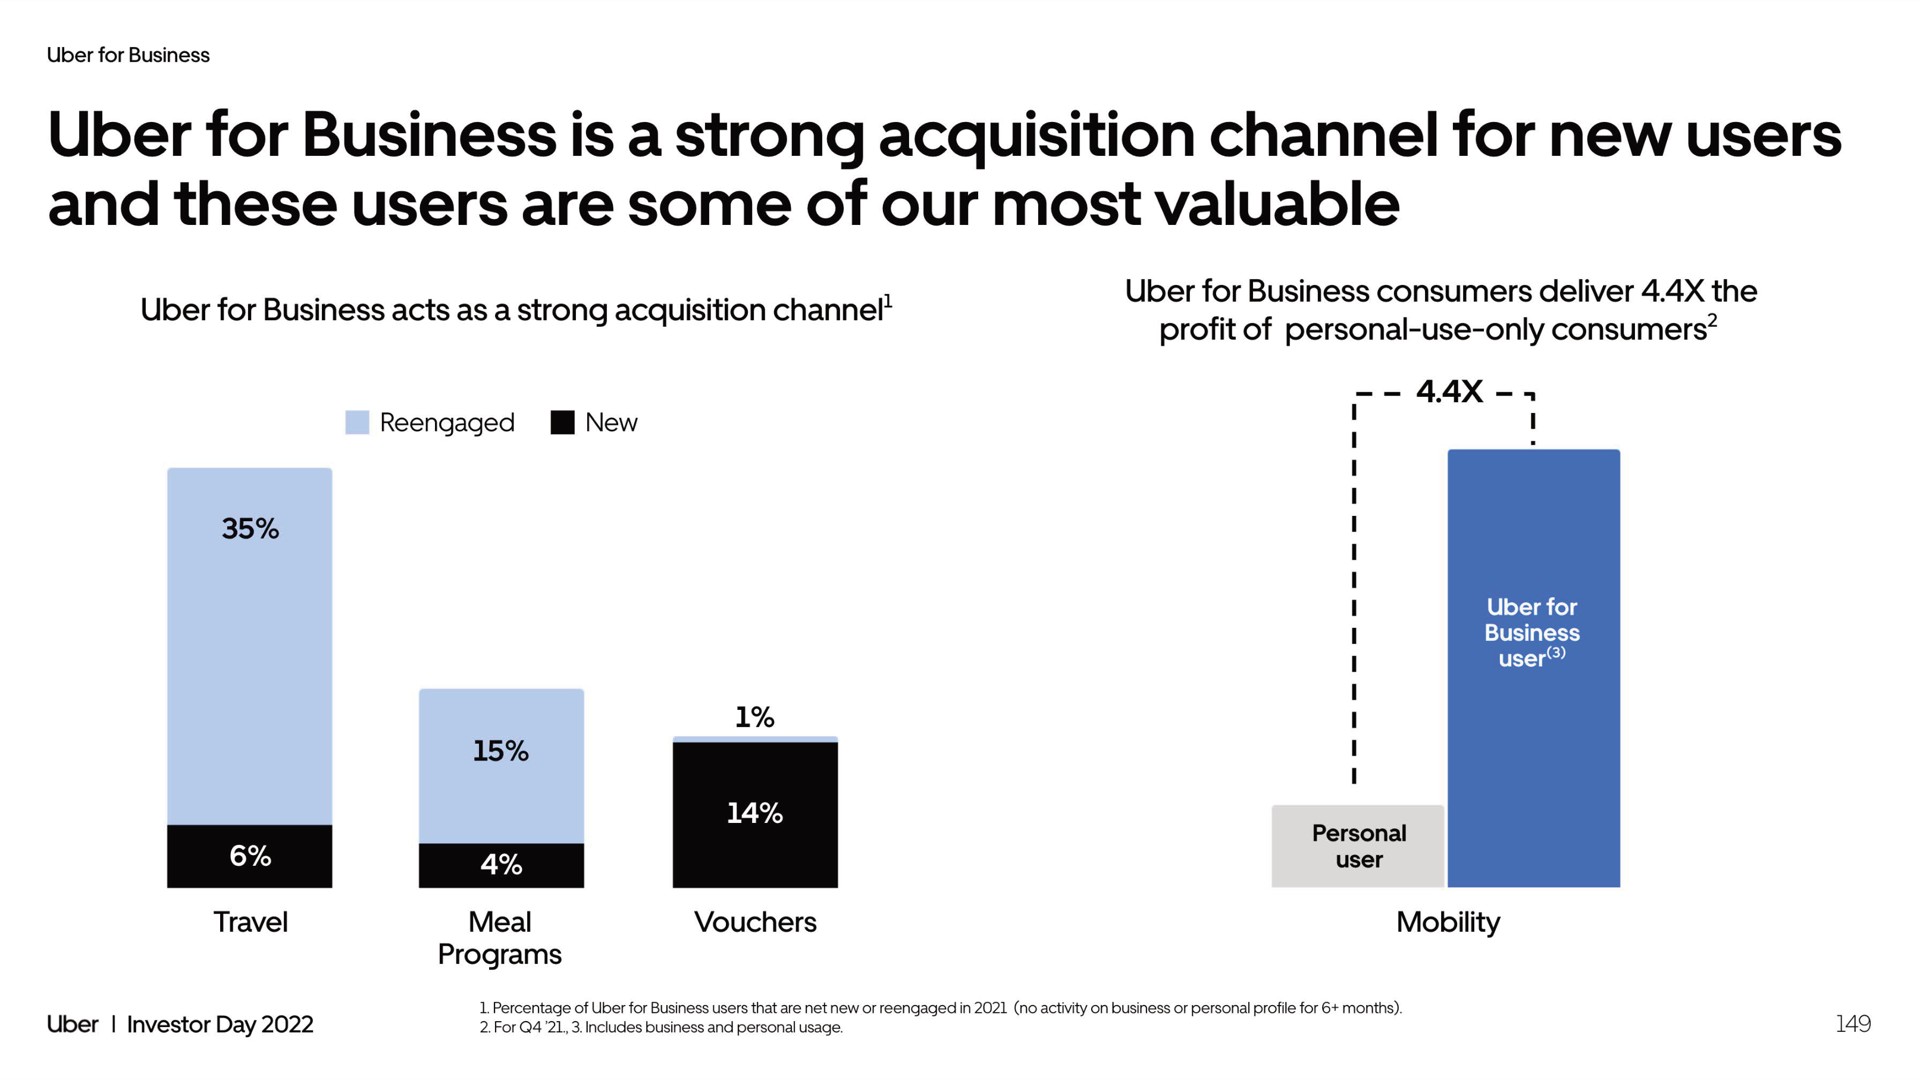 for business is a strong acquisition channel for new users and these users are some of our most valuable | Uber